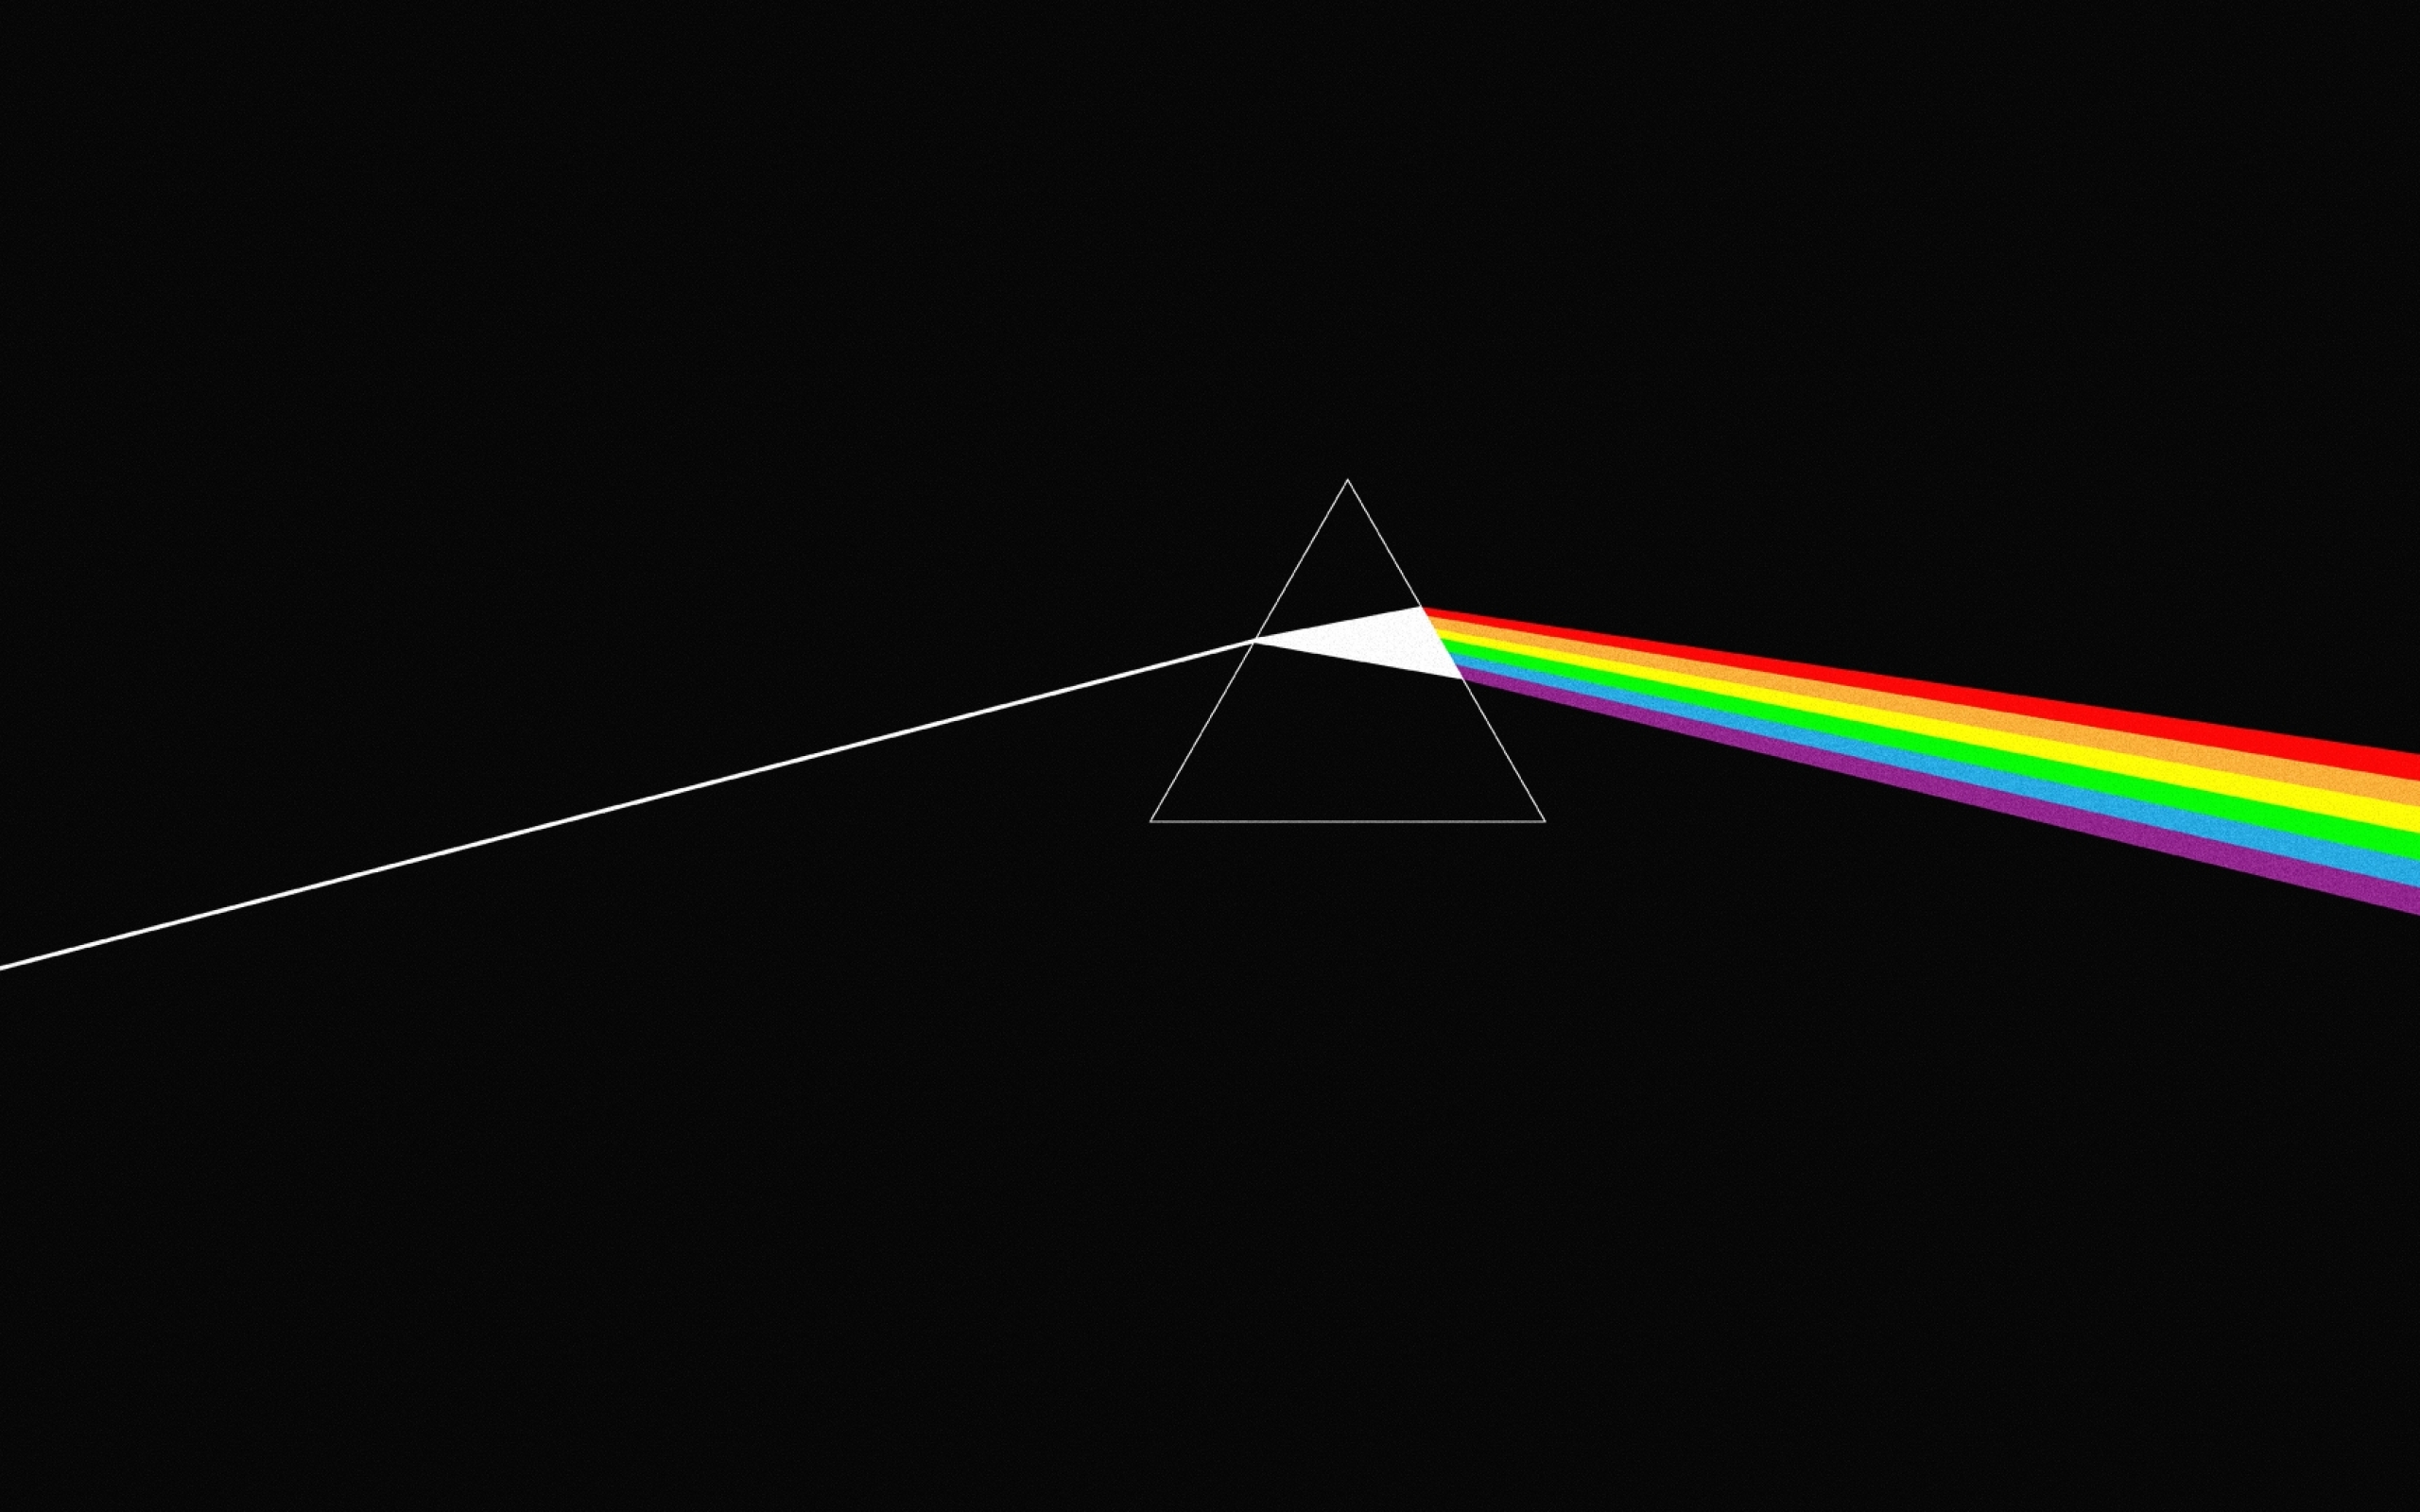 Featured image of post Pink Floyd Wallpaper Iphone Hd